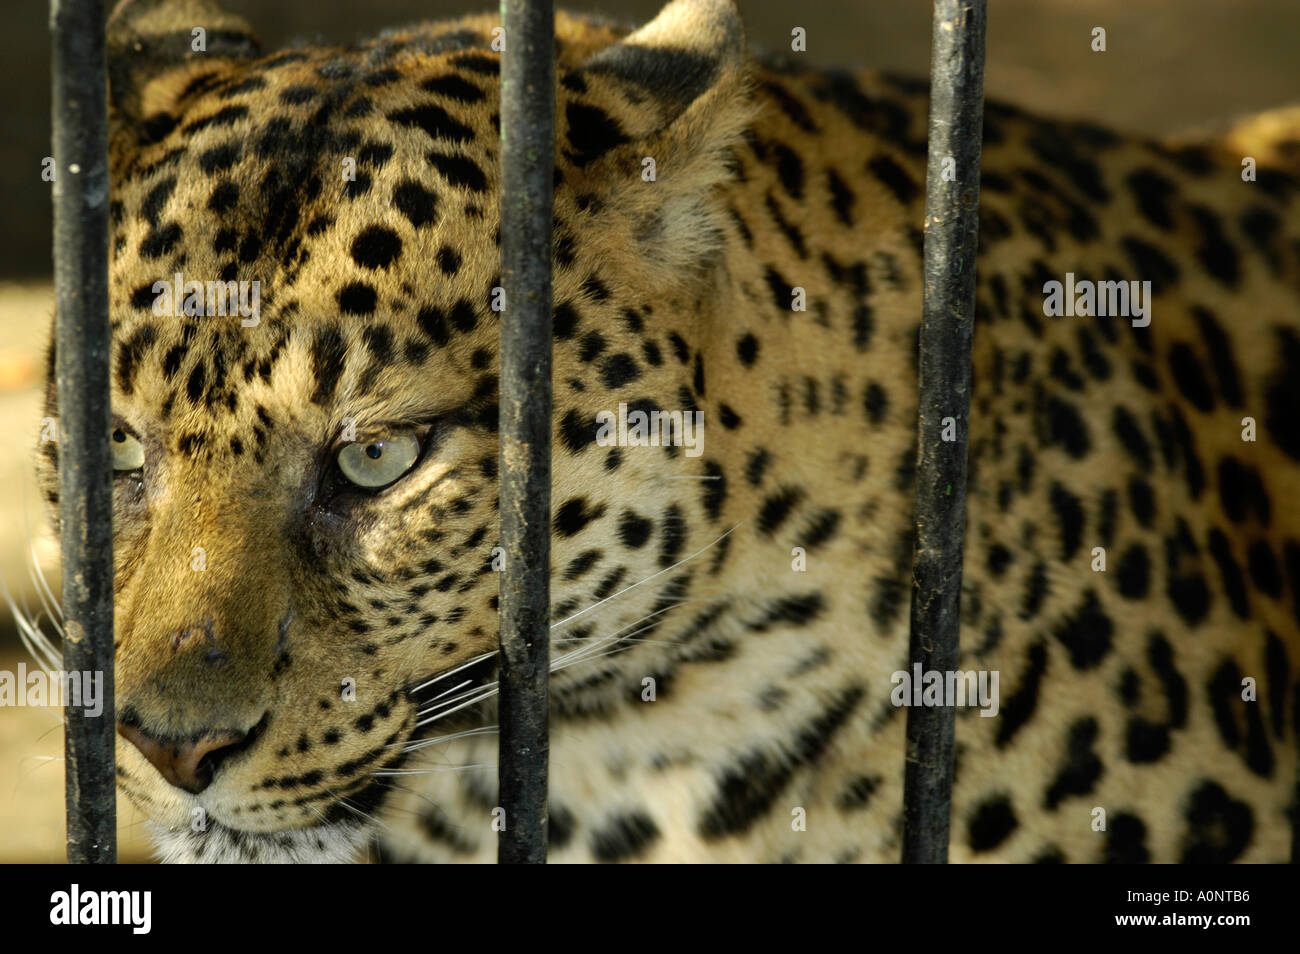 Cheetah in cage Stock Photo